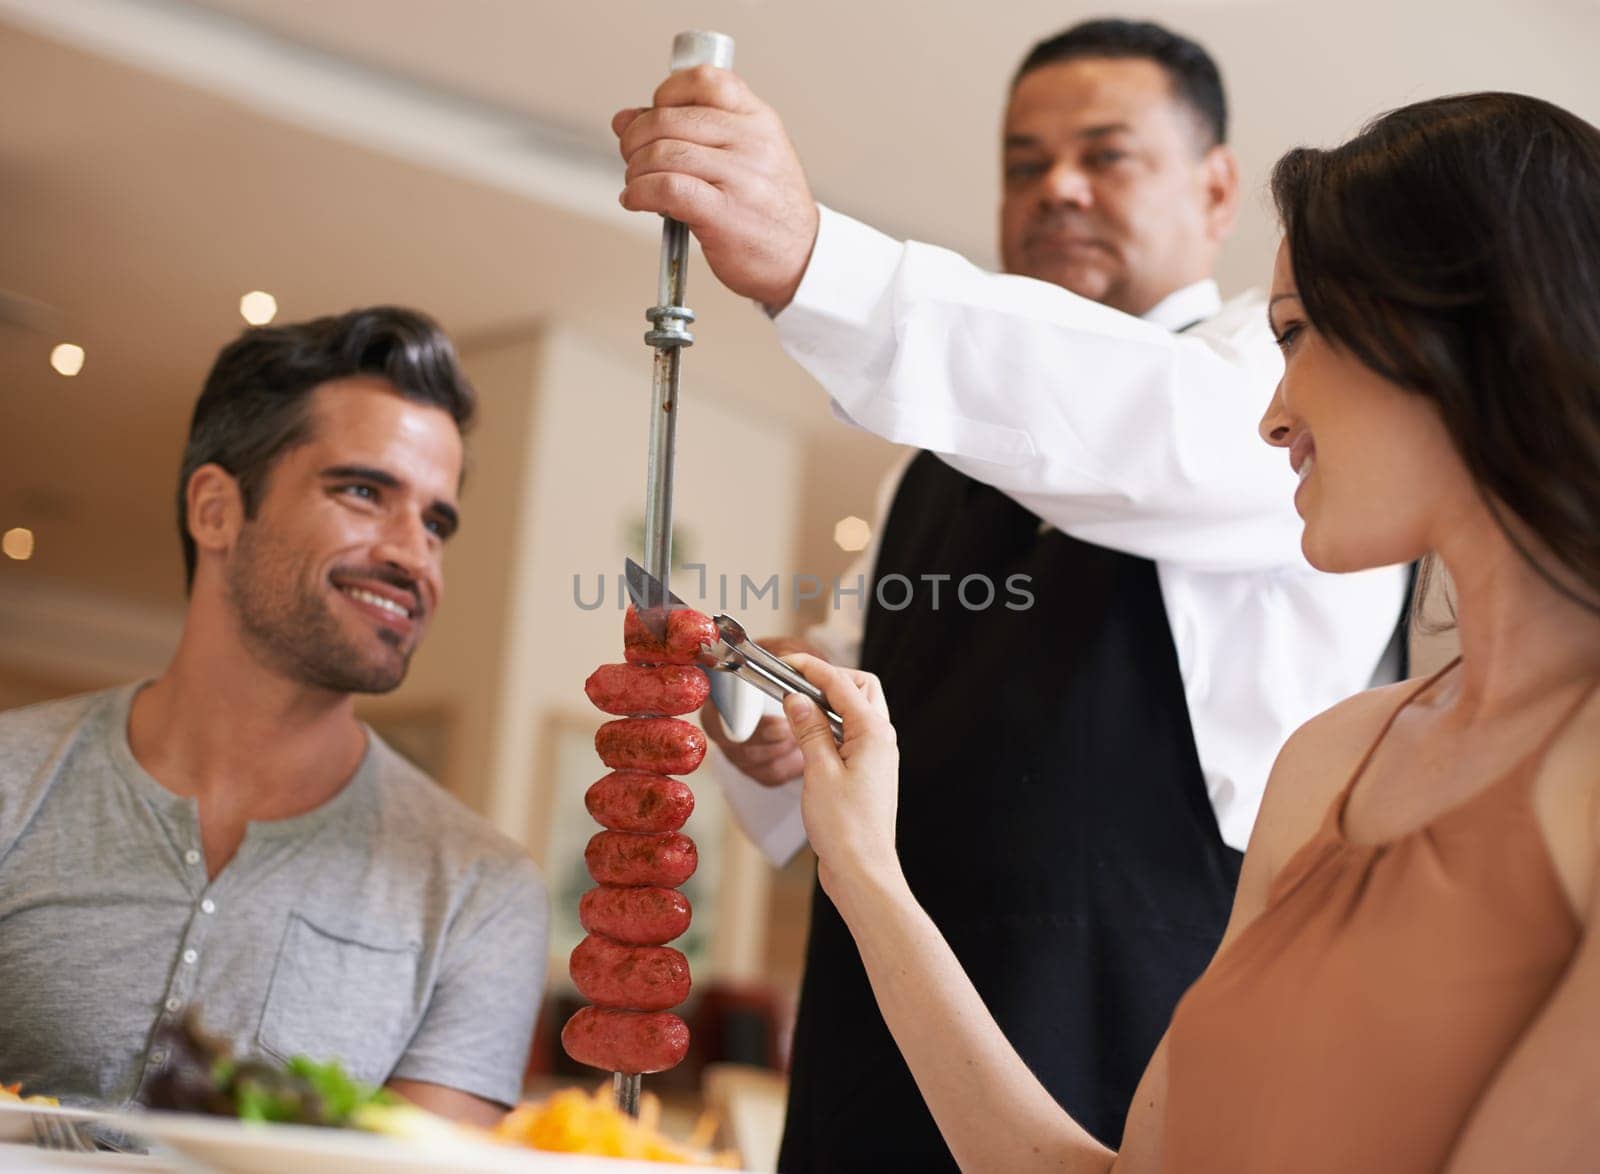 Food, date and romance with couple in restaurant together for celebration or eating espetada. Love, meat or dinner with happy young man and woman in fine dining hospitality establishment for service by YuriArcurs